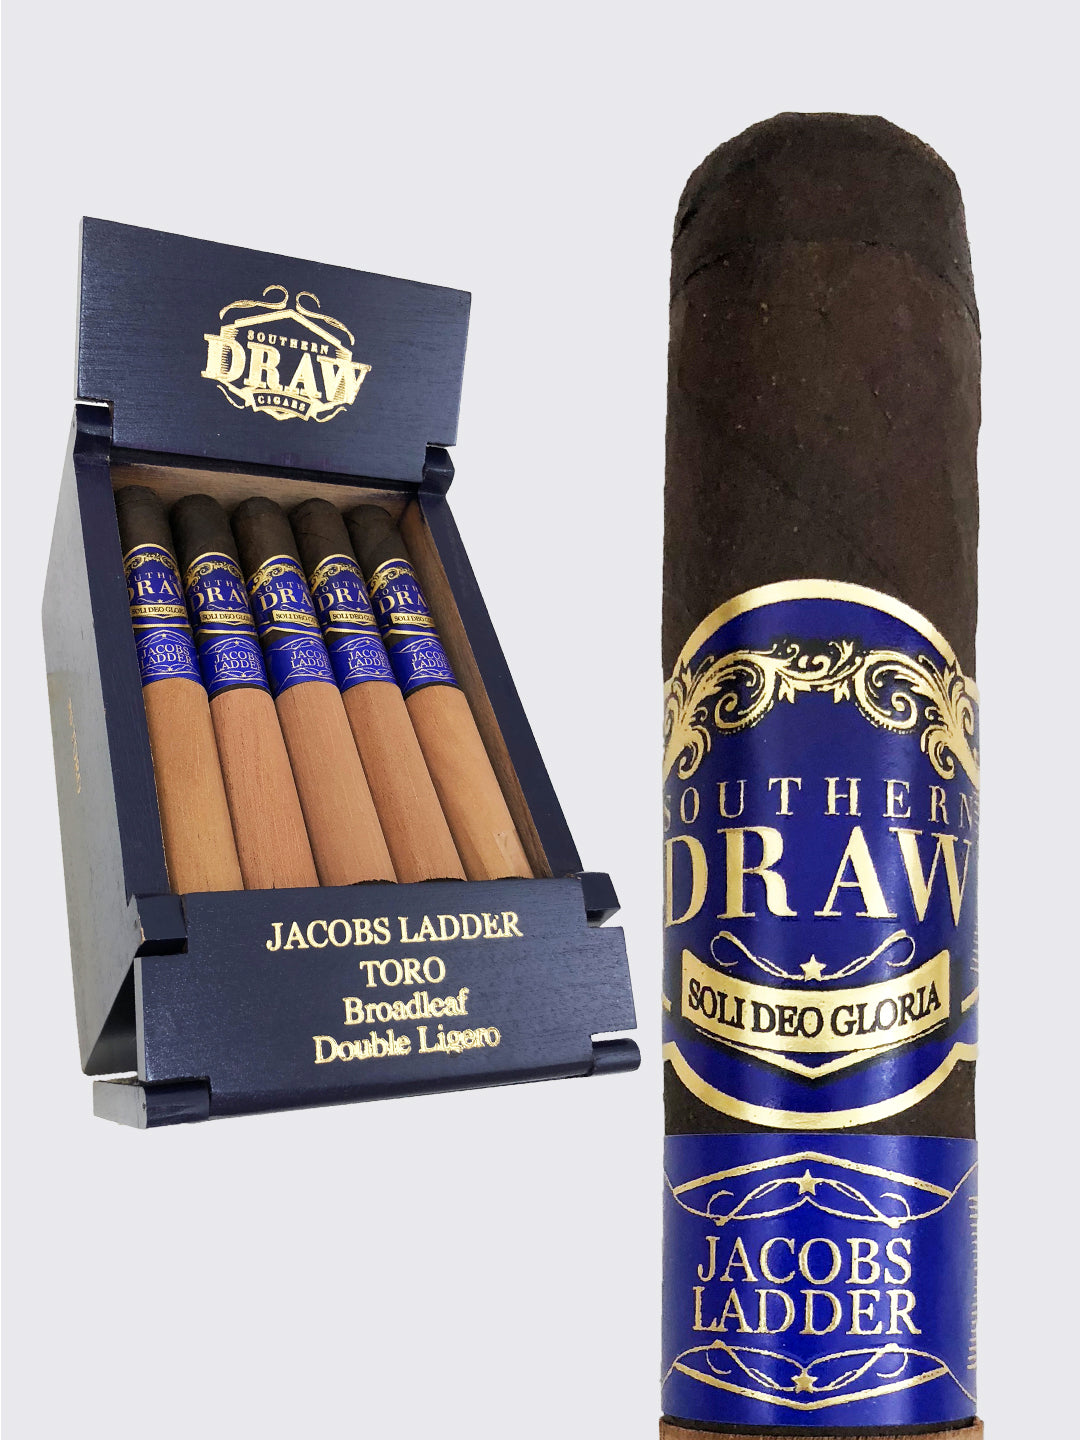 SOUTHERN DRAW CIGARS Jacob's Ladder